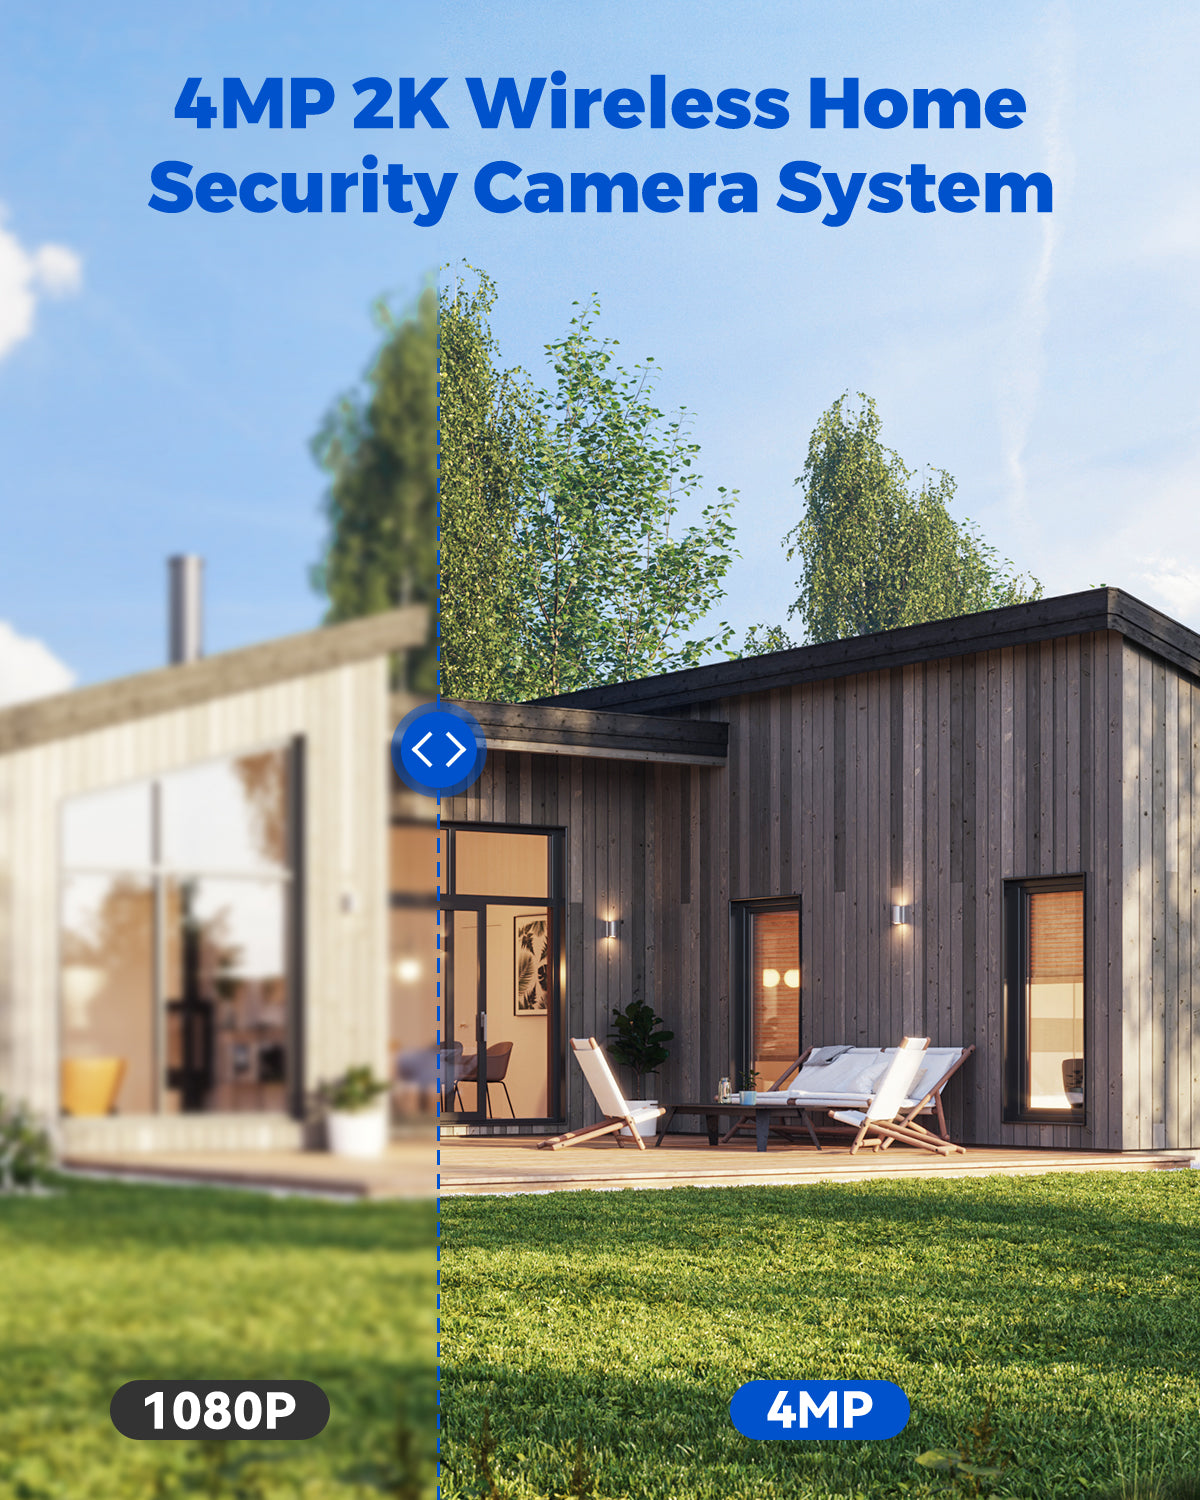 4MP Wireless Solar Security Camera System with 7'' Portable Touchscreen Monitor, Motion Tracking and Color Night Vision